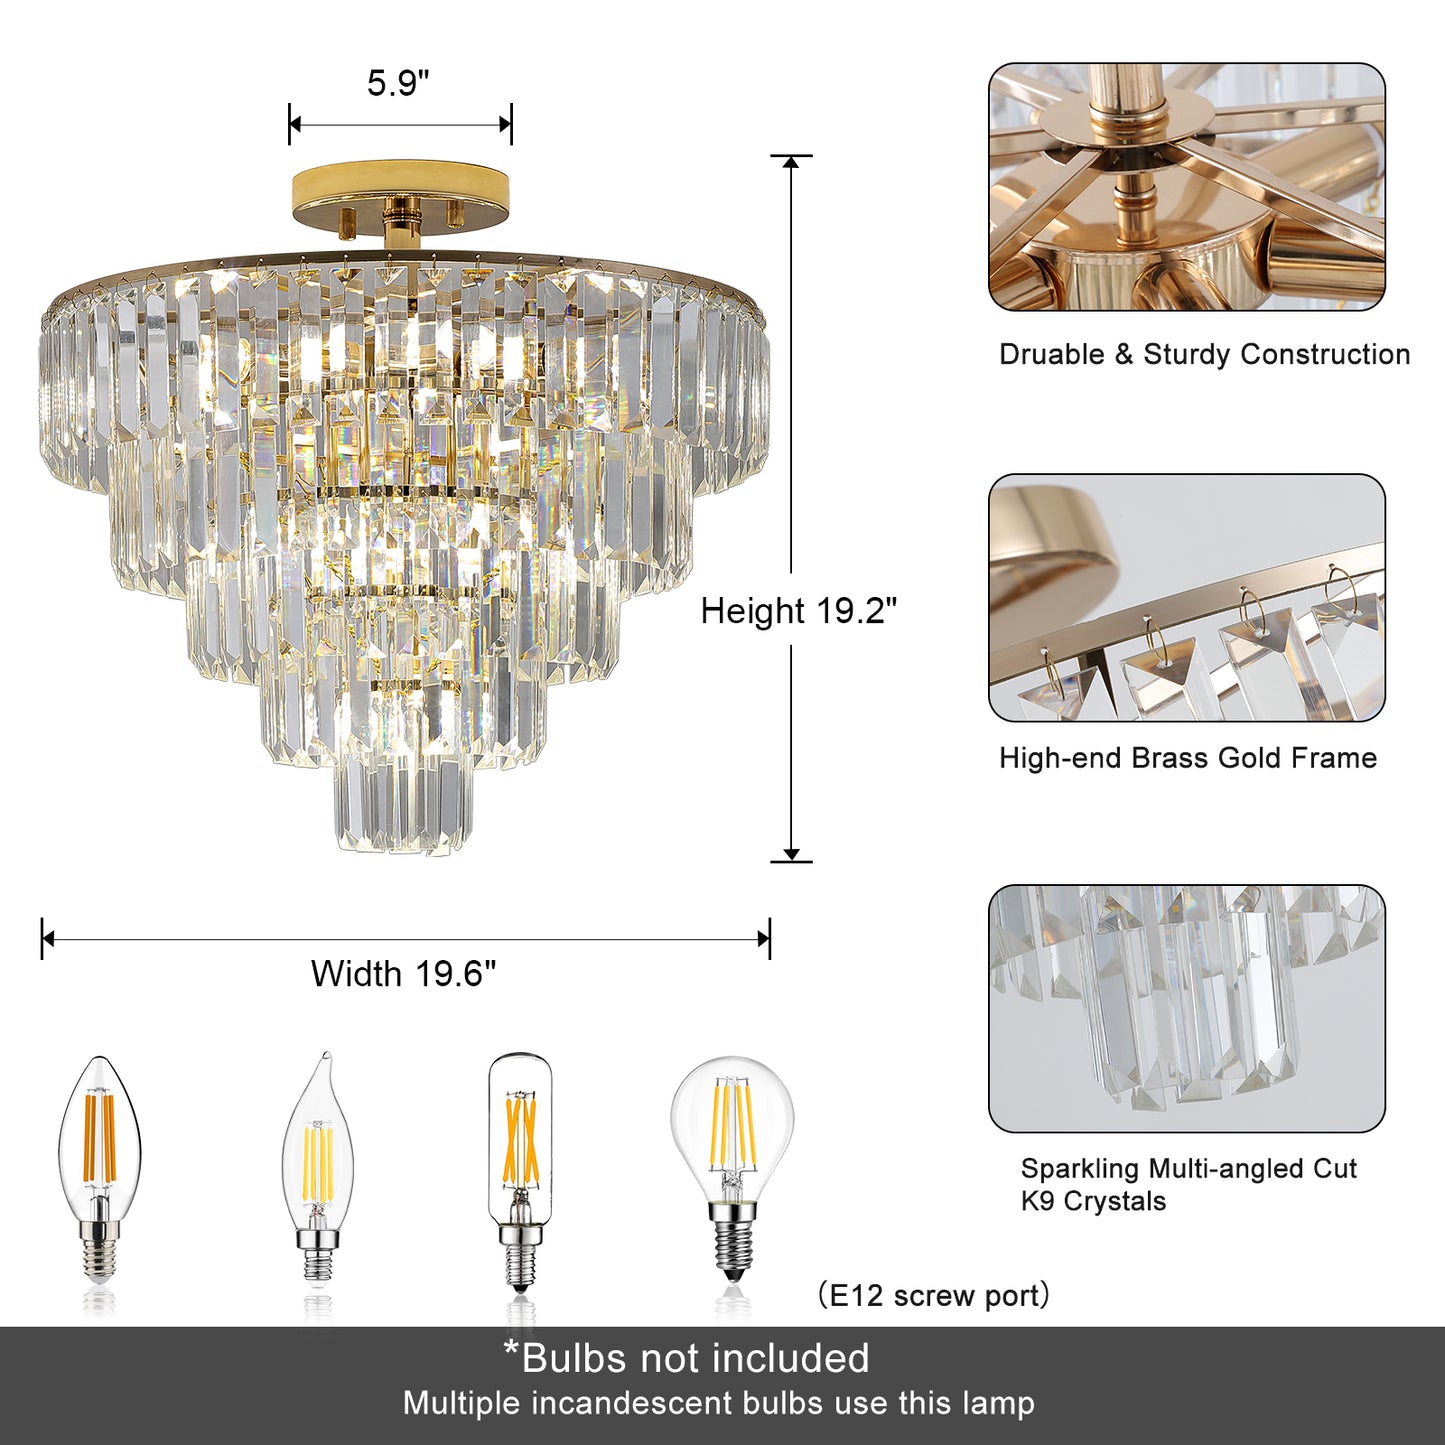 Gold Crystal Chandeliers,5-Tier Round Semi Flush Mount Chandelier Light Fixture,Large Contemporary Luxury Ceiling Lighting for Living Room Dining Room Bedroom Hallway - Enova Luxe Home Store